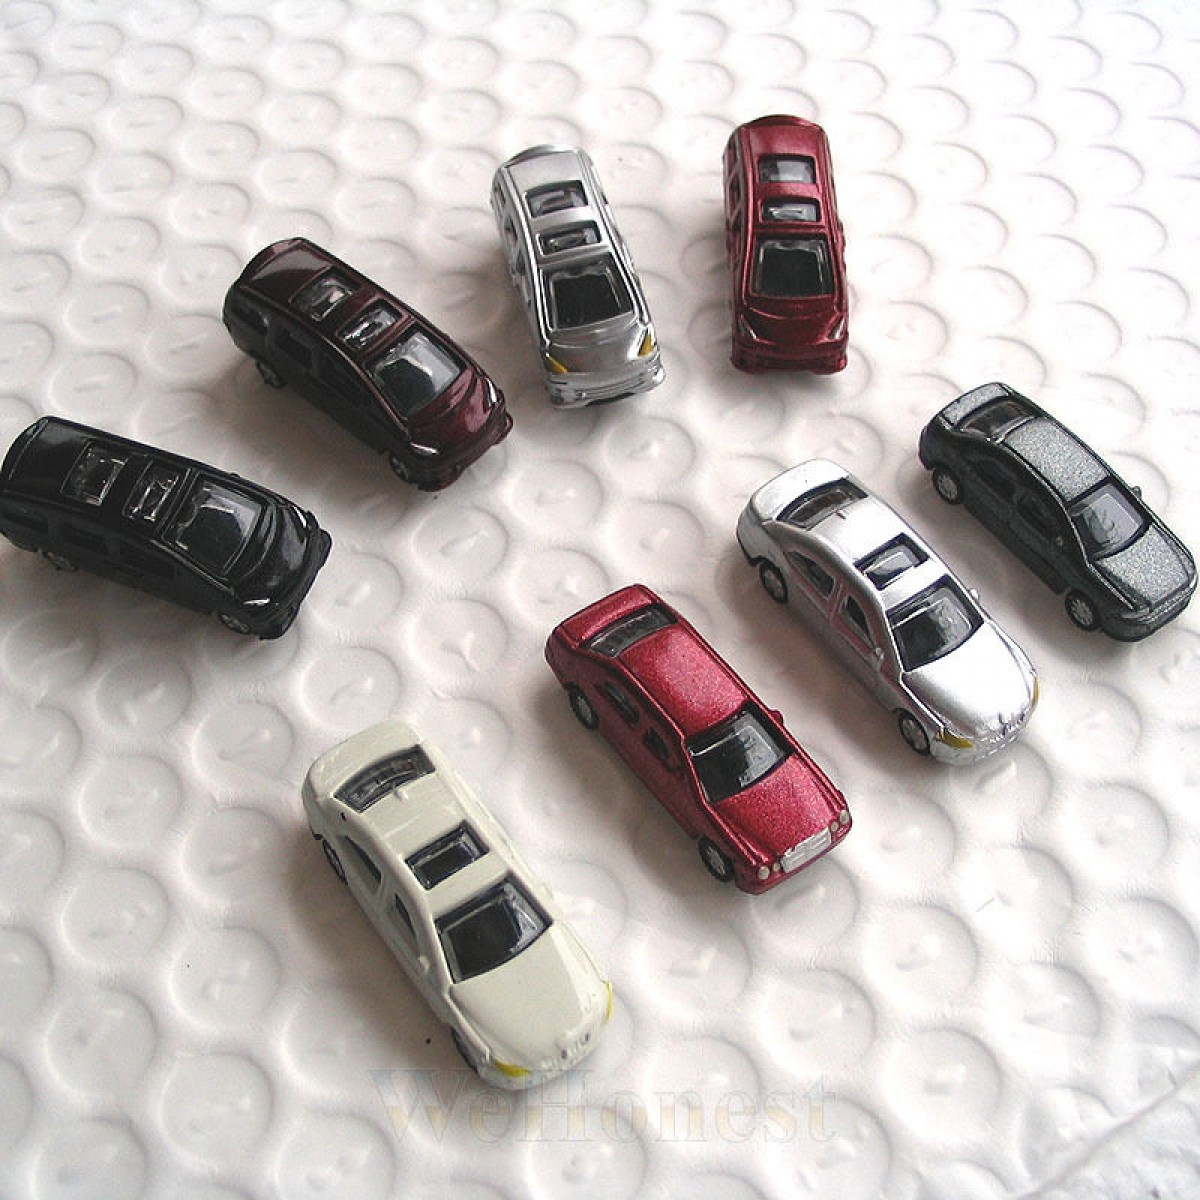   50 pcs N gauge Model Cars 1:160 well Painted for Layout Scene (WeHonest)